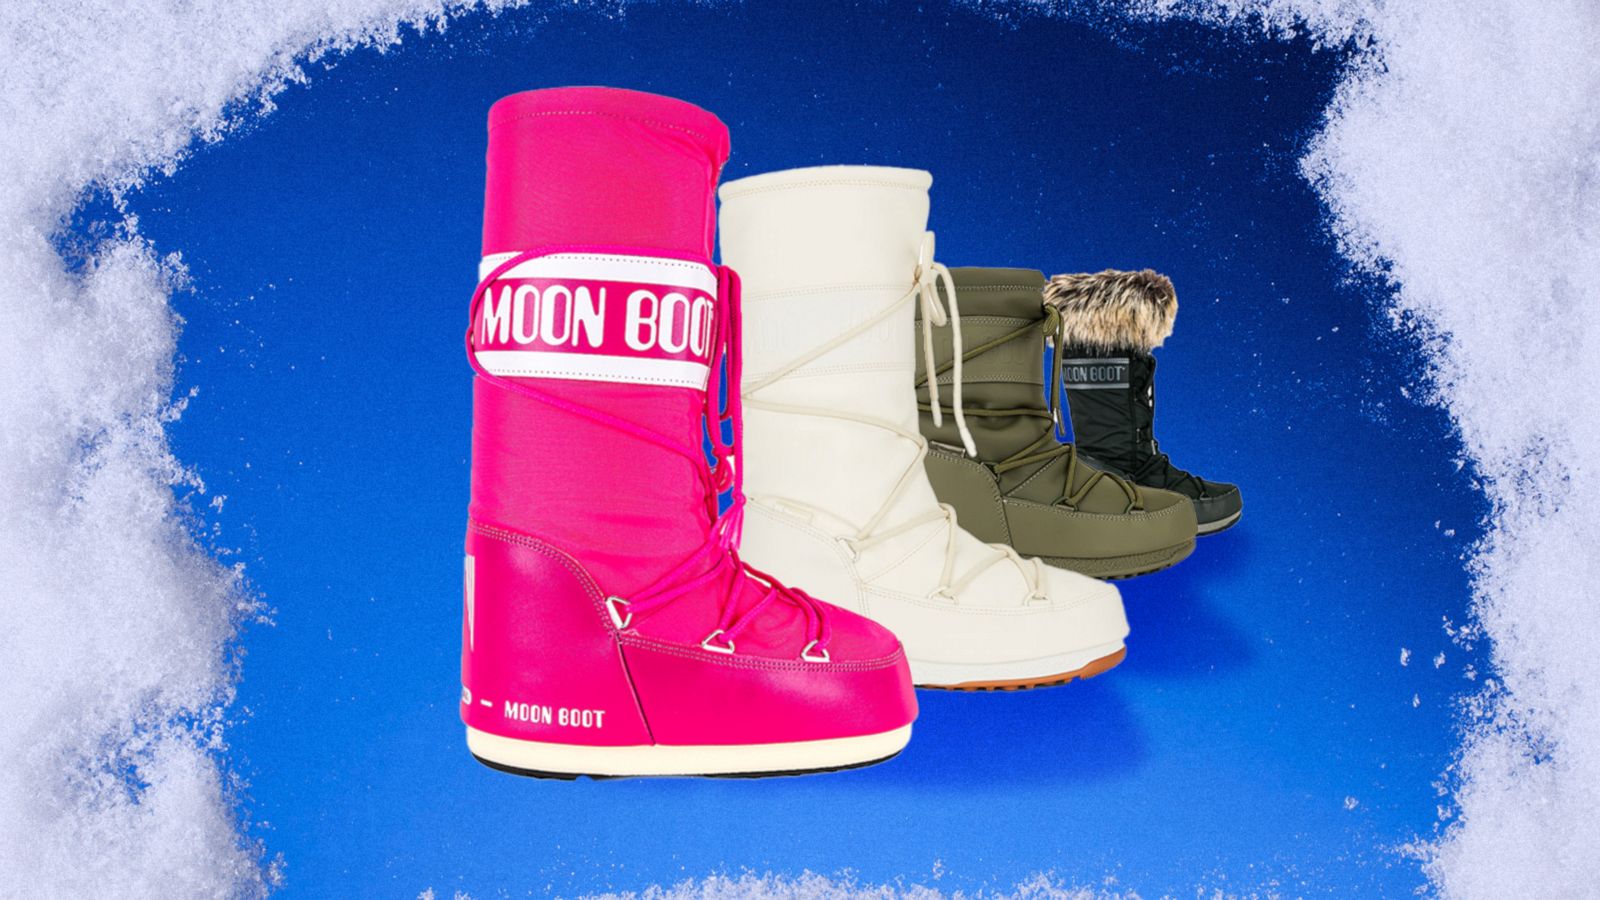 Moonboots  Winter vacation outfits, Cold weather outfits, Cold weather  fashion